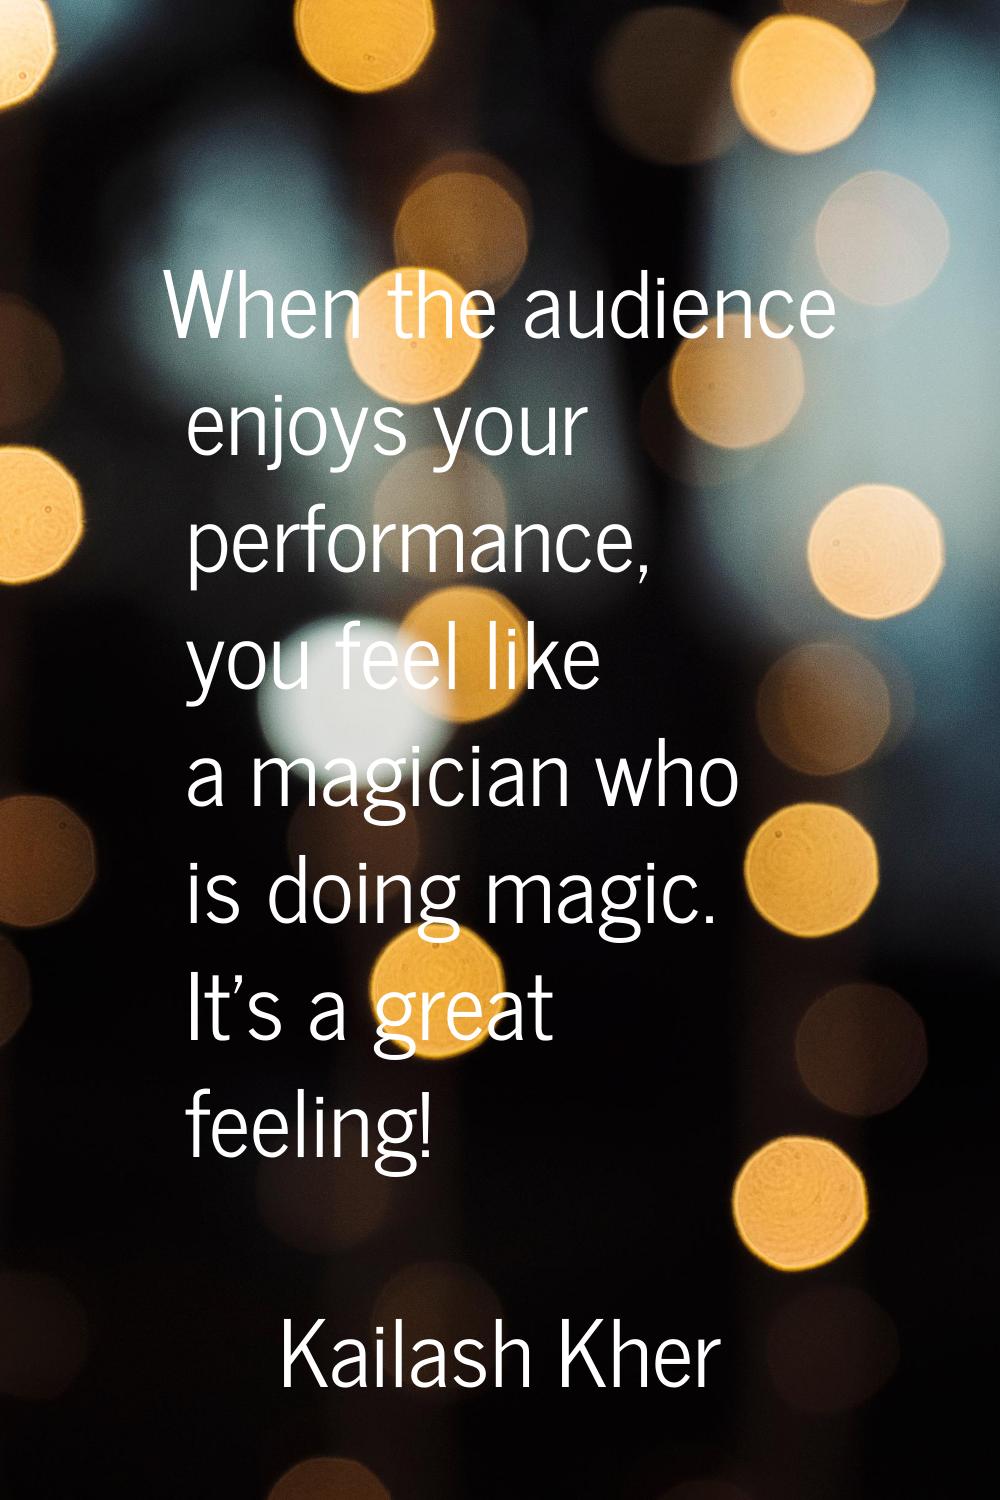 When the audience enjoys your performance, you feel like a magician who is doing magic. It's a grea